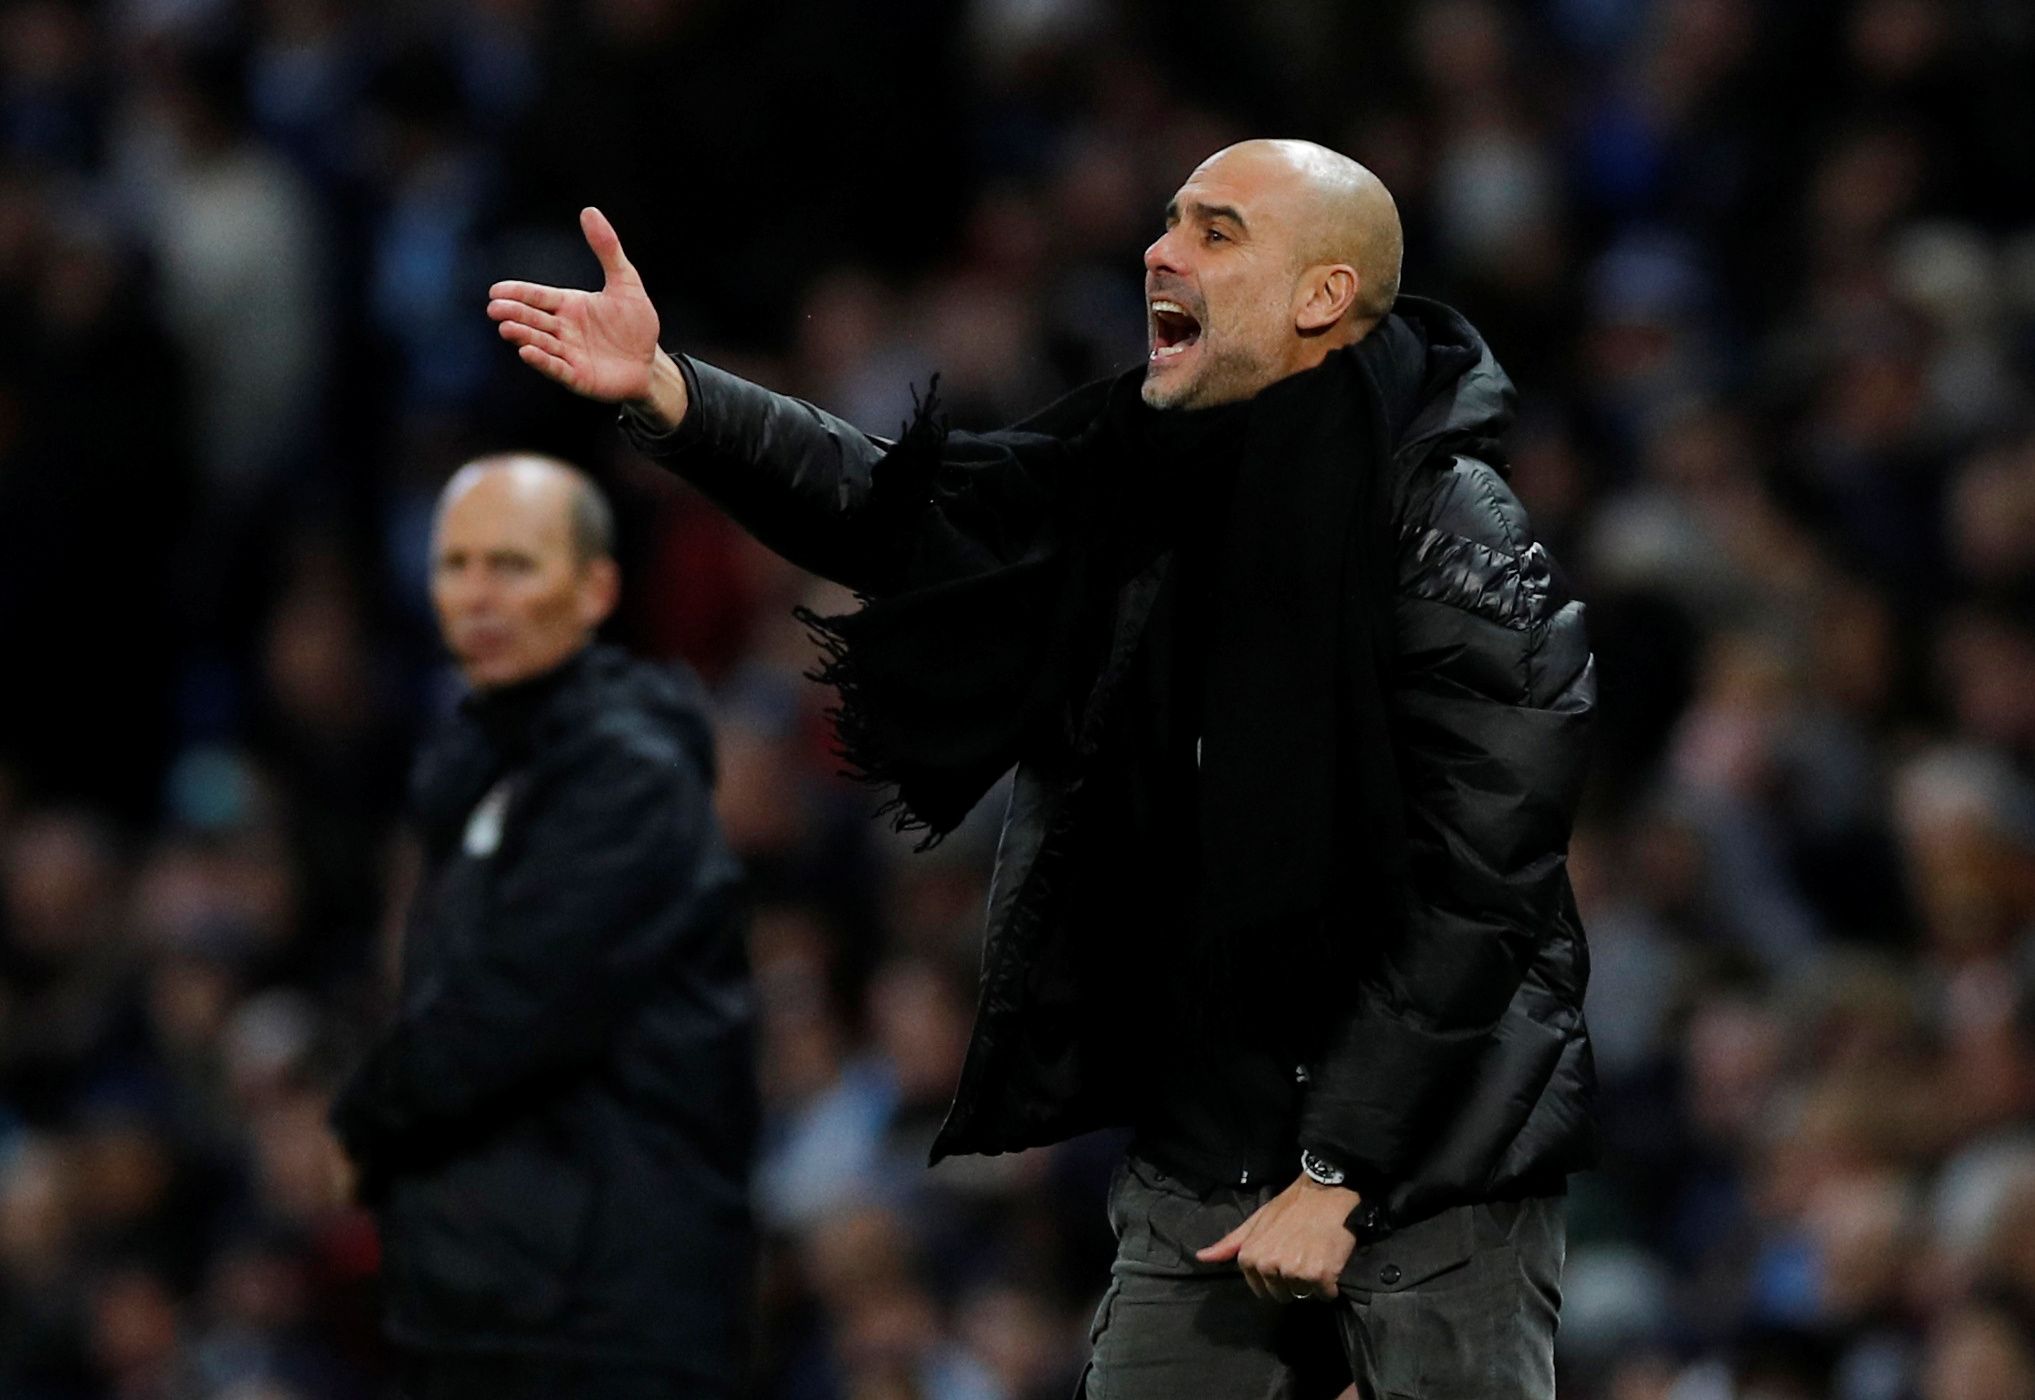 Soccer Football - Premier League - Manchester City v Manchester United - Etihad Stadium, Manchester, Britain - December 7, 2019  Manchester City manager Pep Guardiola reacts        REUTERS/Phil Noble  EDITORIAL USE ONLY. No use with unauthorized audio, video, data, fixture lists, club/league logos or 